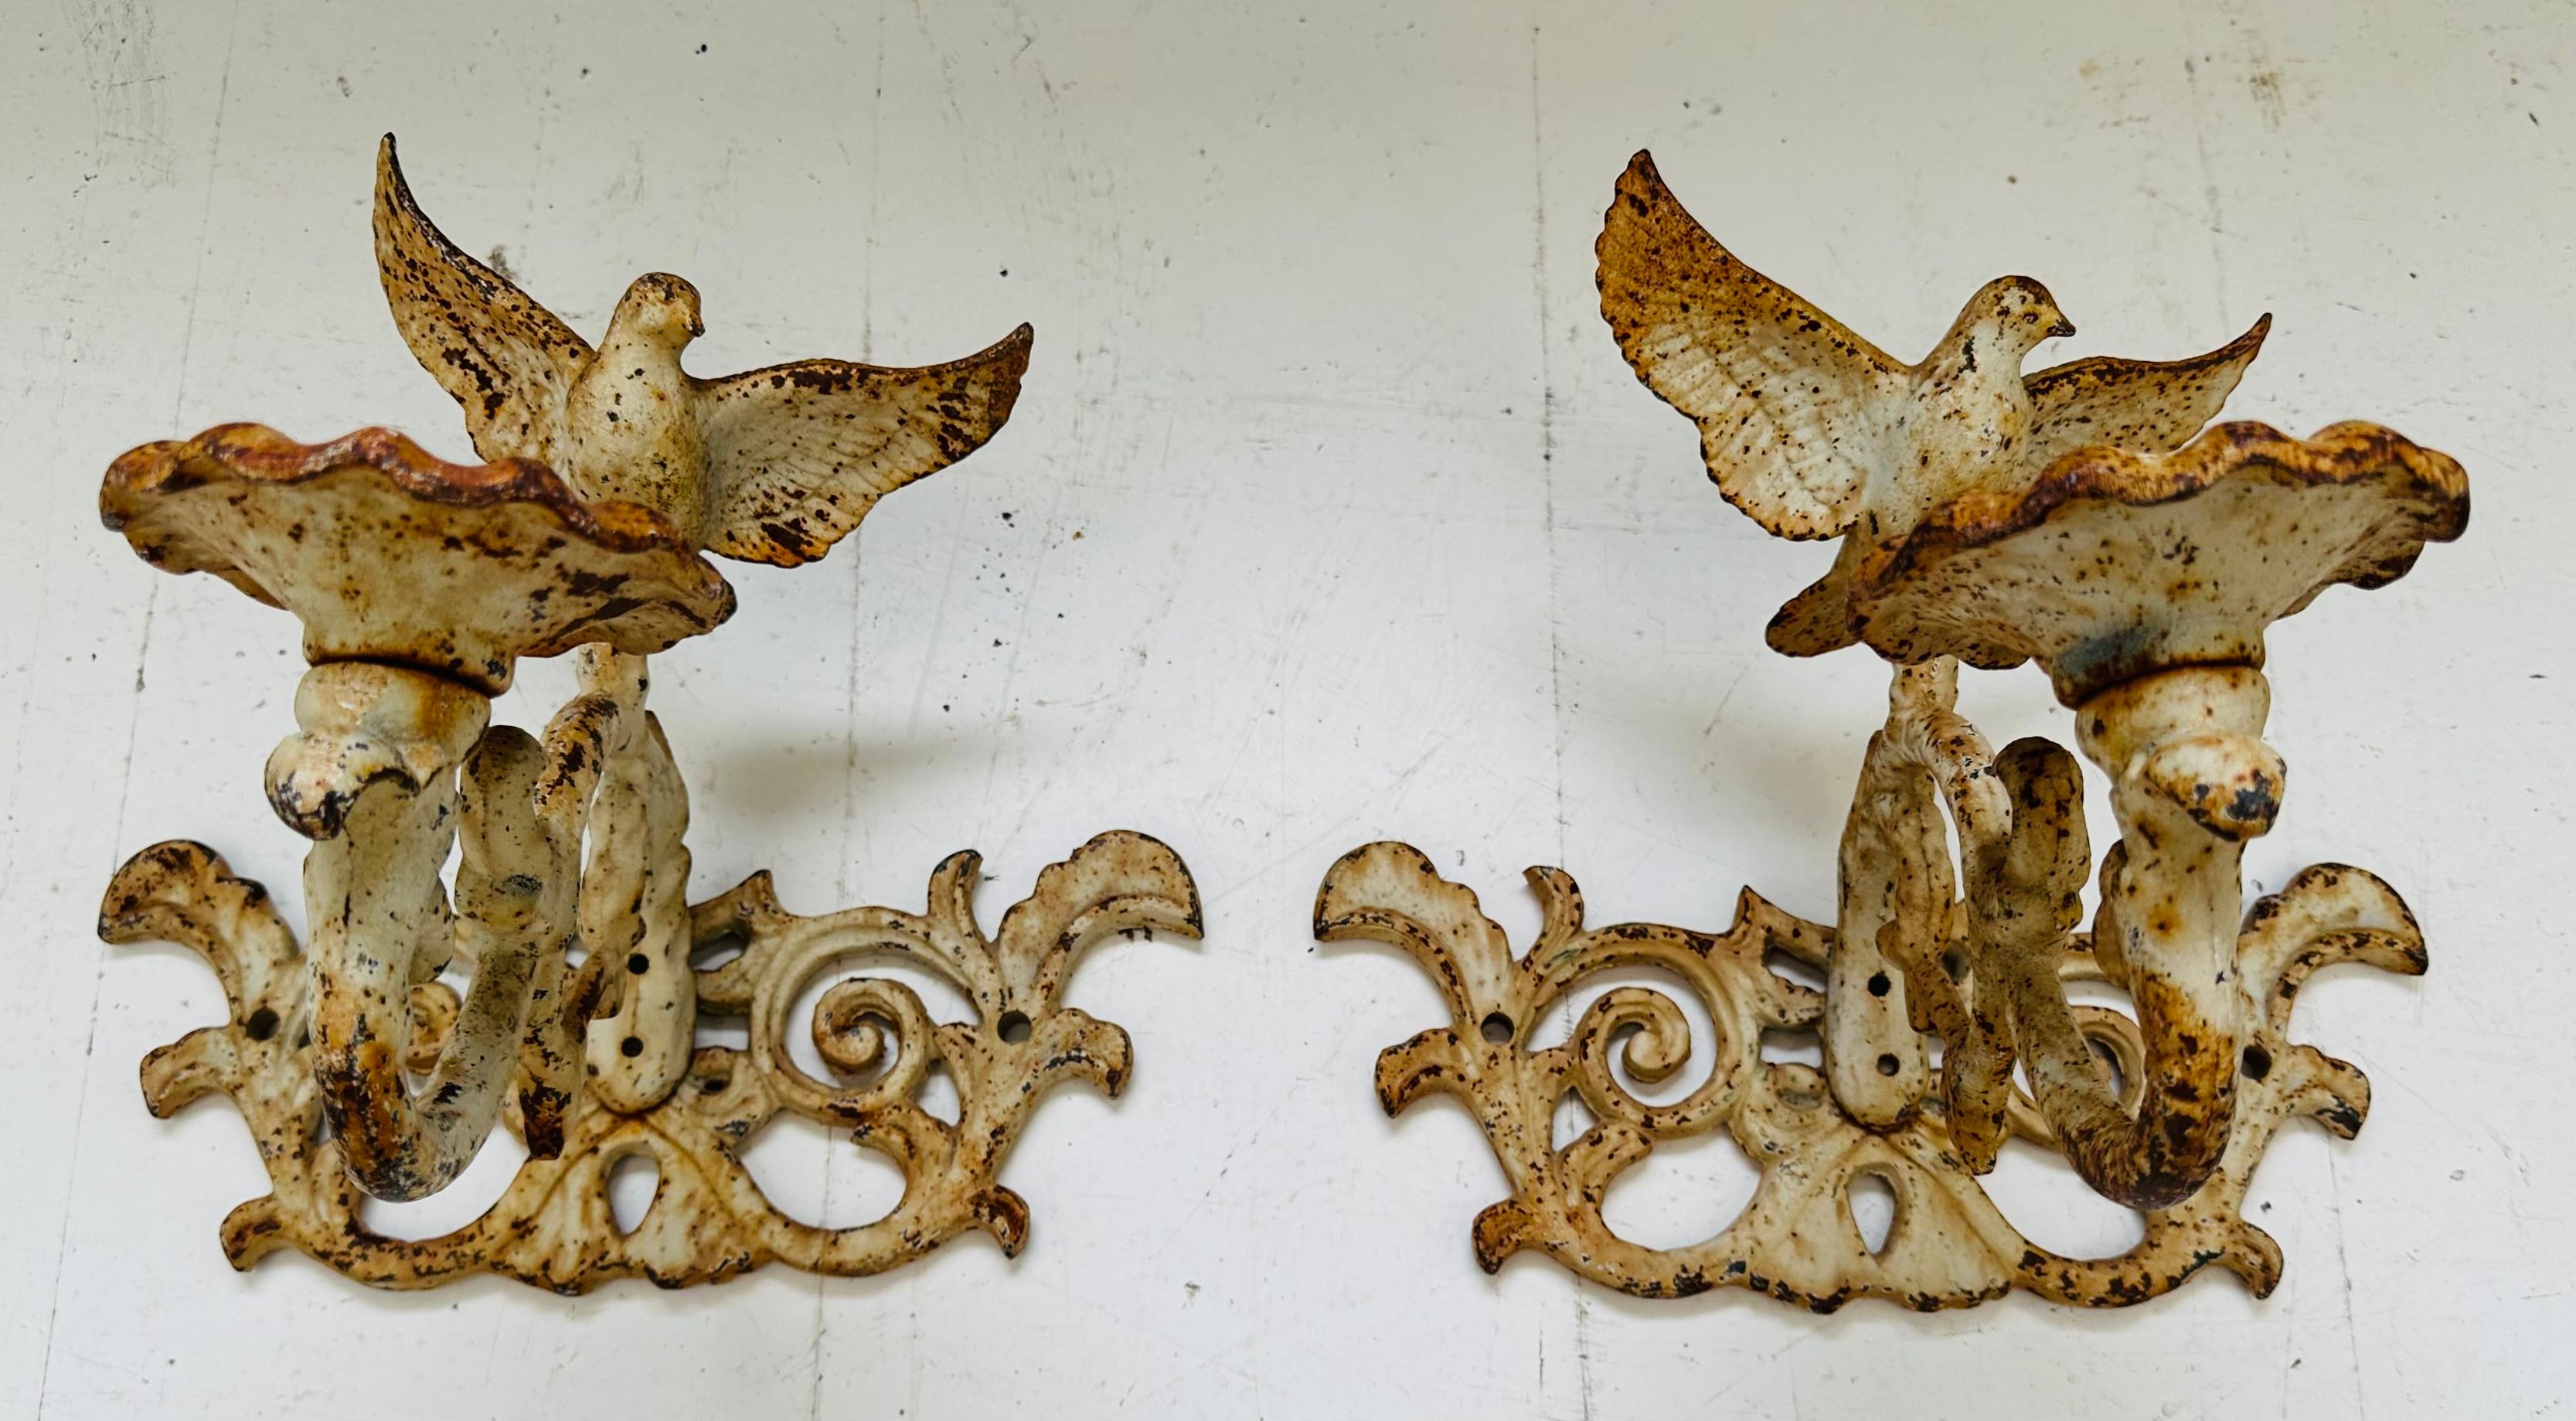 Pair of late nineteenth century/early twentieth century cast iron ornamental rustic garden candleholders.  Originated in Cuba around the 1890-1900 era. 

Each candleholder features an open-winged dove finial perched on top of a scrolled baroque cast